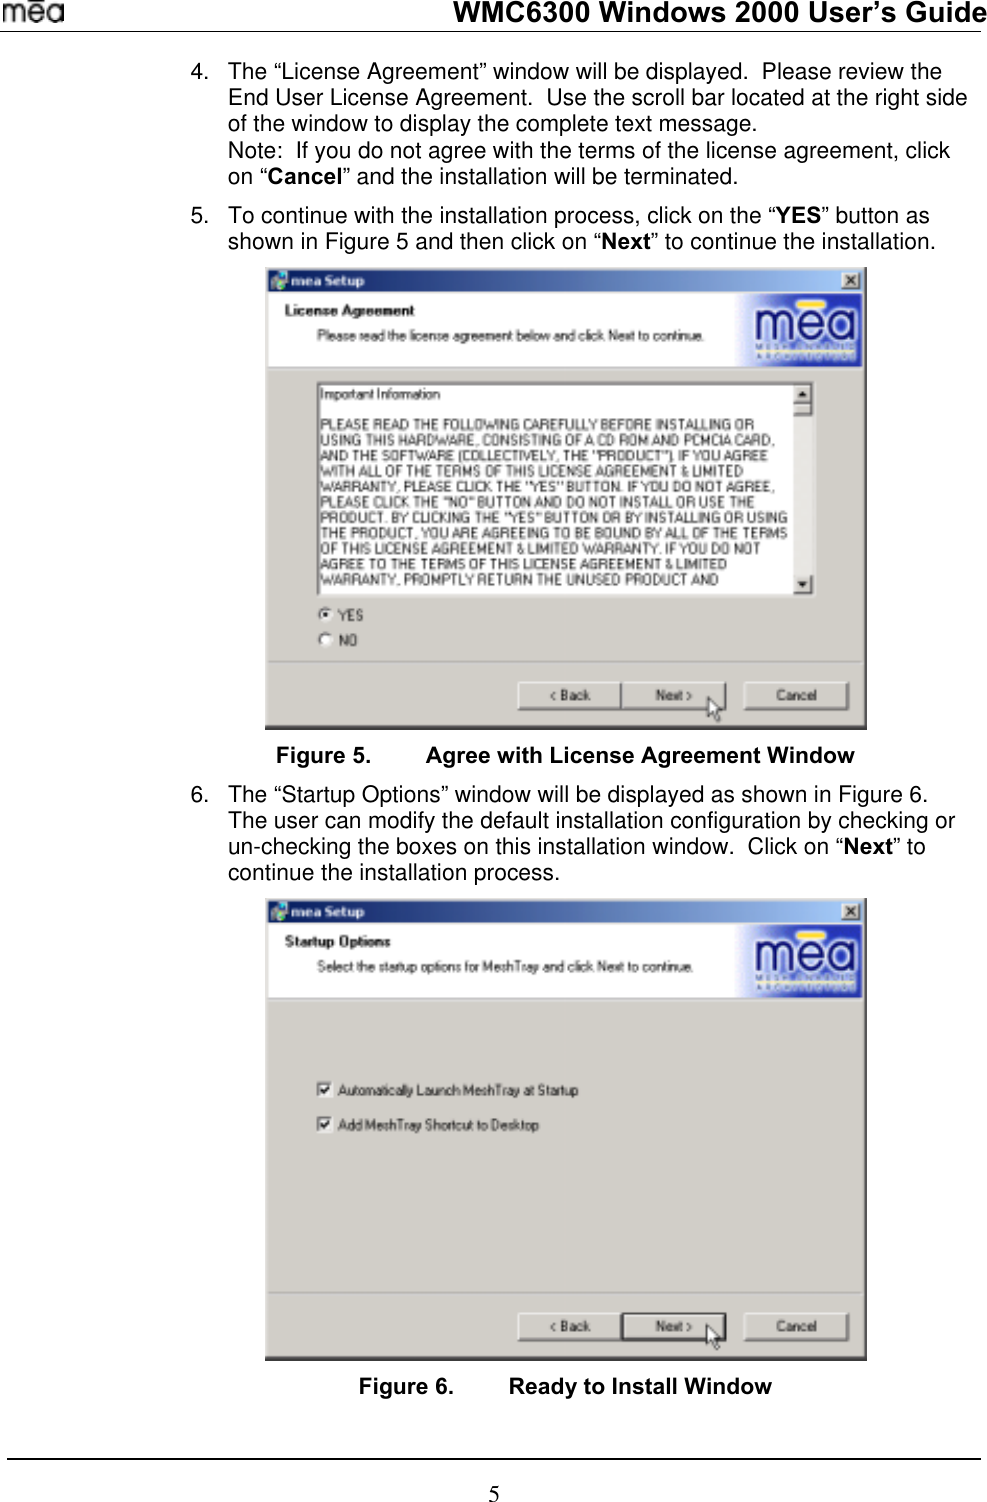   WMC6300 Windows 2000 User’s Guide 4. 5. The “License Agreement” window will be displayed.  Please review the End User License Agreement.  Use the scroll bar located at the right side of the window to display the complete text message.   Note:  If you do not agree with the terms of the license agreement, click on “Cancel” and the installation will be terminated. To continue with the installation process, click on the “YES” button as shown in Figure 5 and then click on “Next” to continue the installation.    Figure 5.  Agree with License Agreement Window 6.  The “Startup Options” window will be displayed as shown in Figure 6.  The user can modify the default installation configuration by checking or un-checking the boxes on this installation window.  Click on “Next” to continue the installation process.   Figure 6.  Ready to Install Window 5 